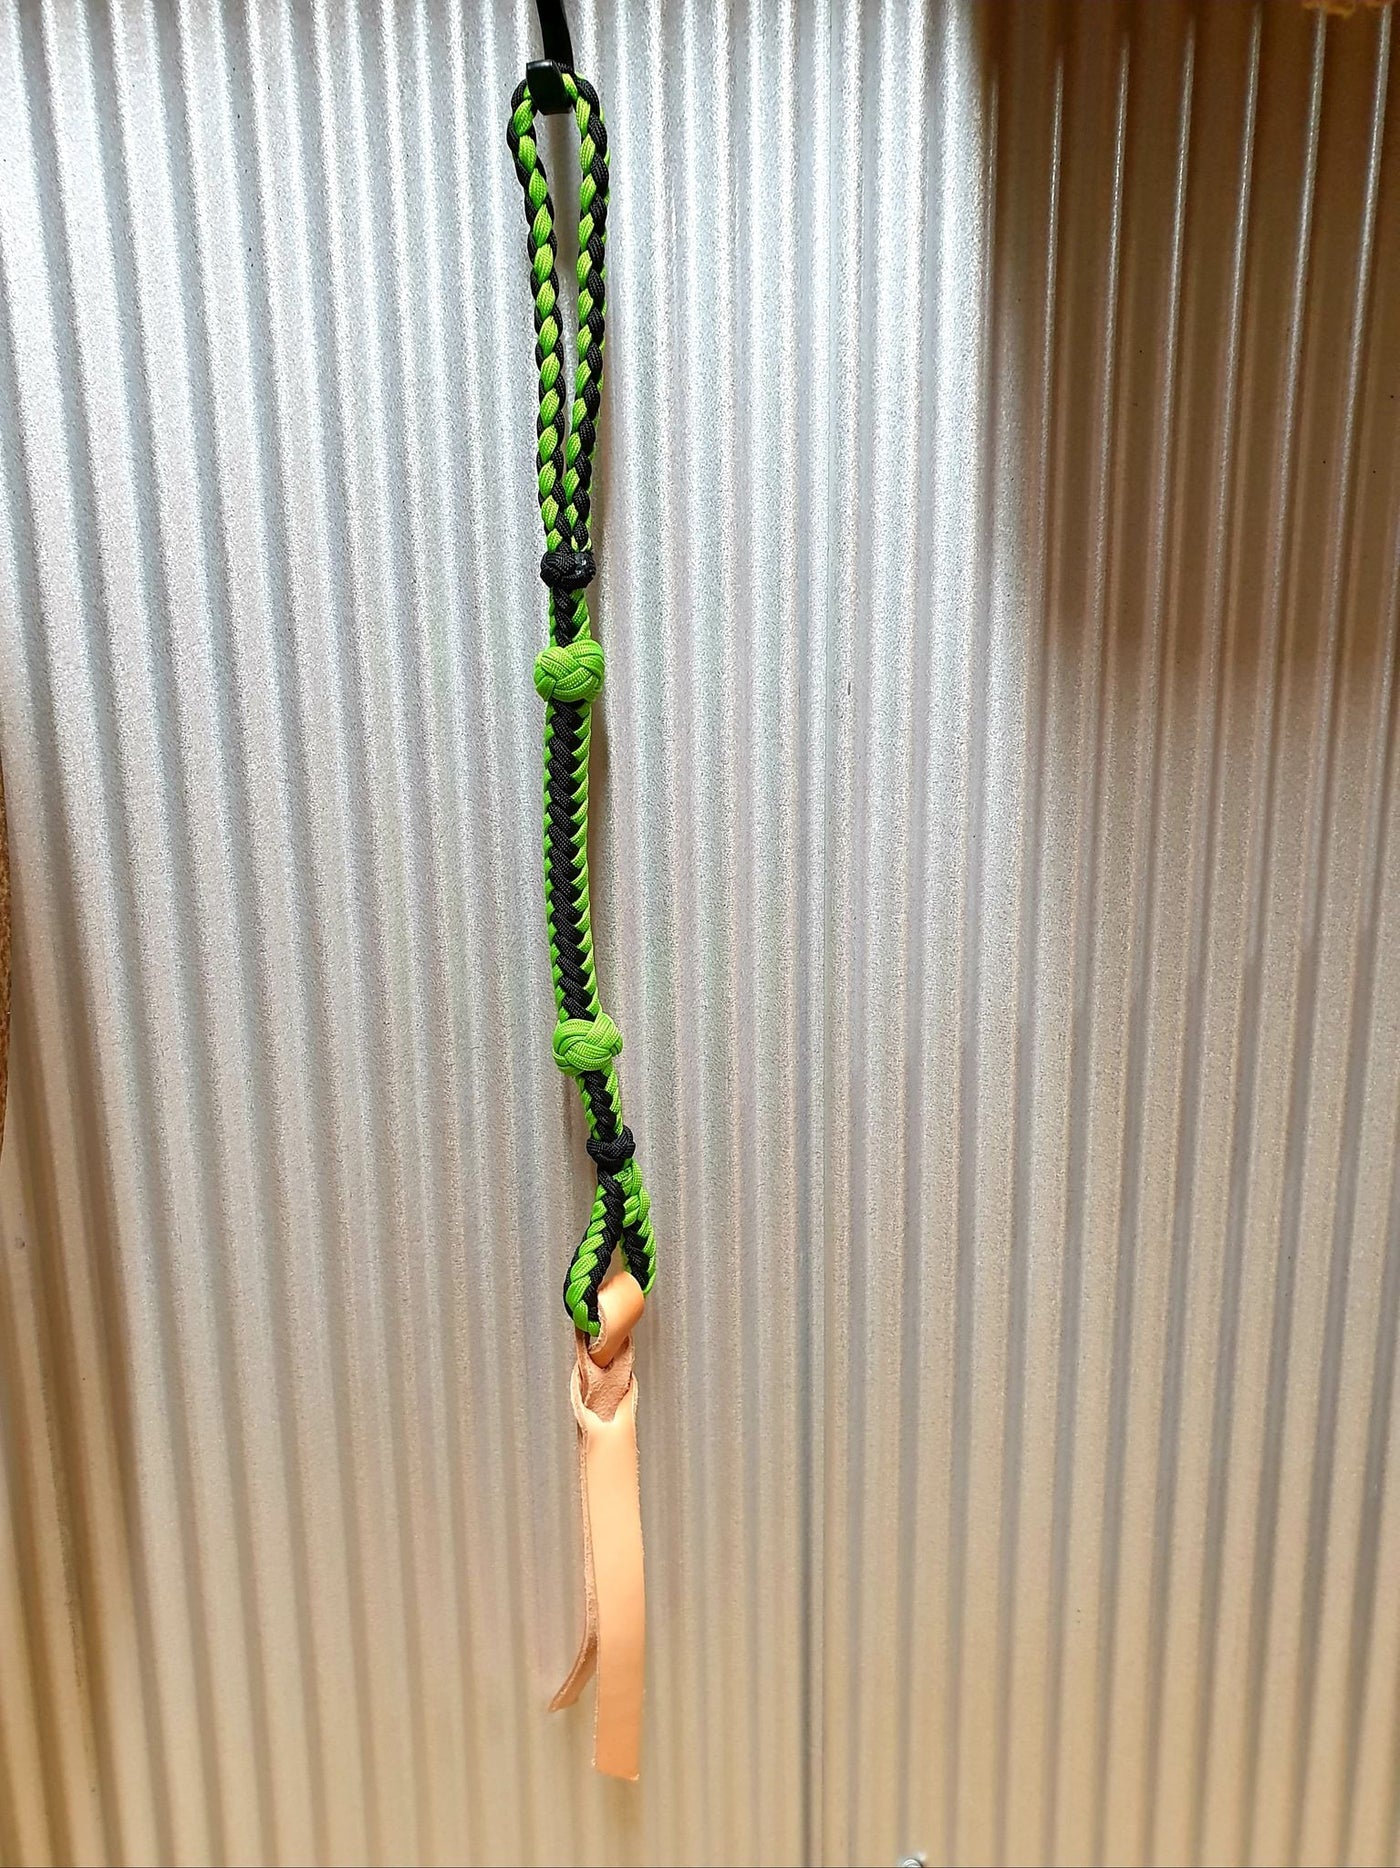 Quirt - Equi-Sky Lime Green and Black Braided Barrel Quirt with Leather Popper